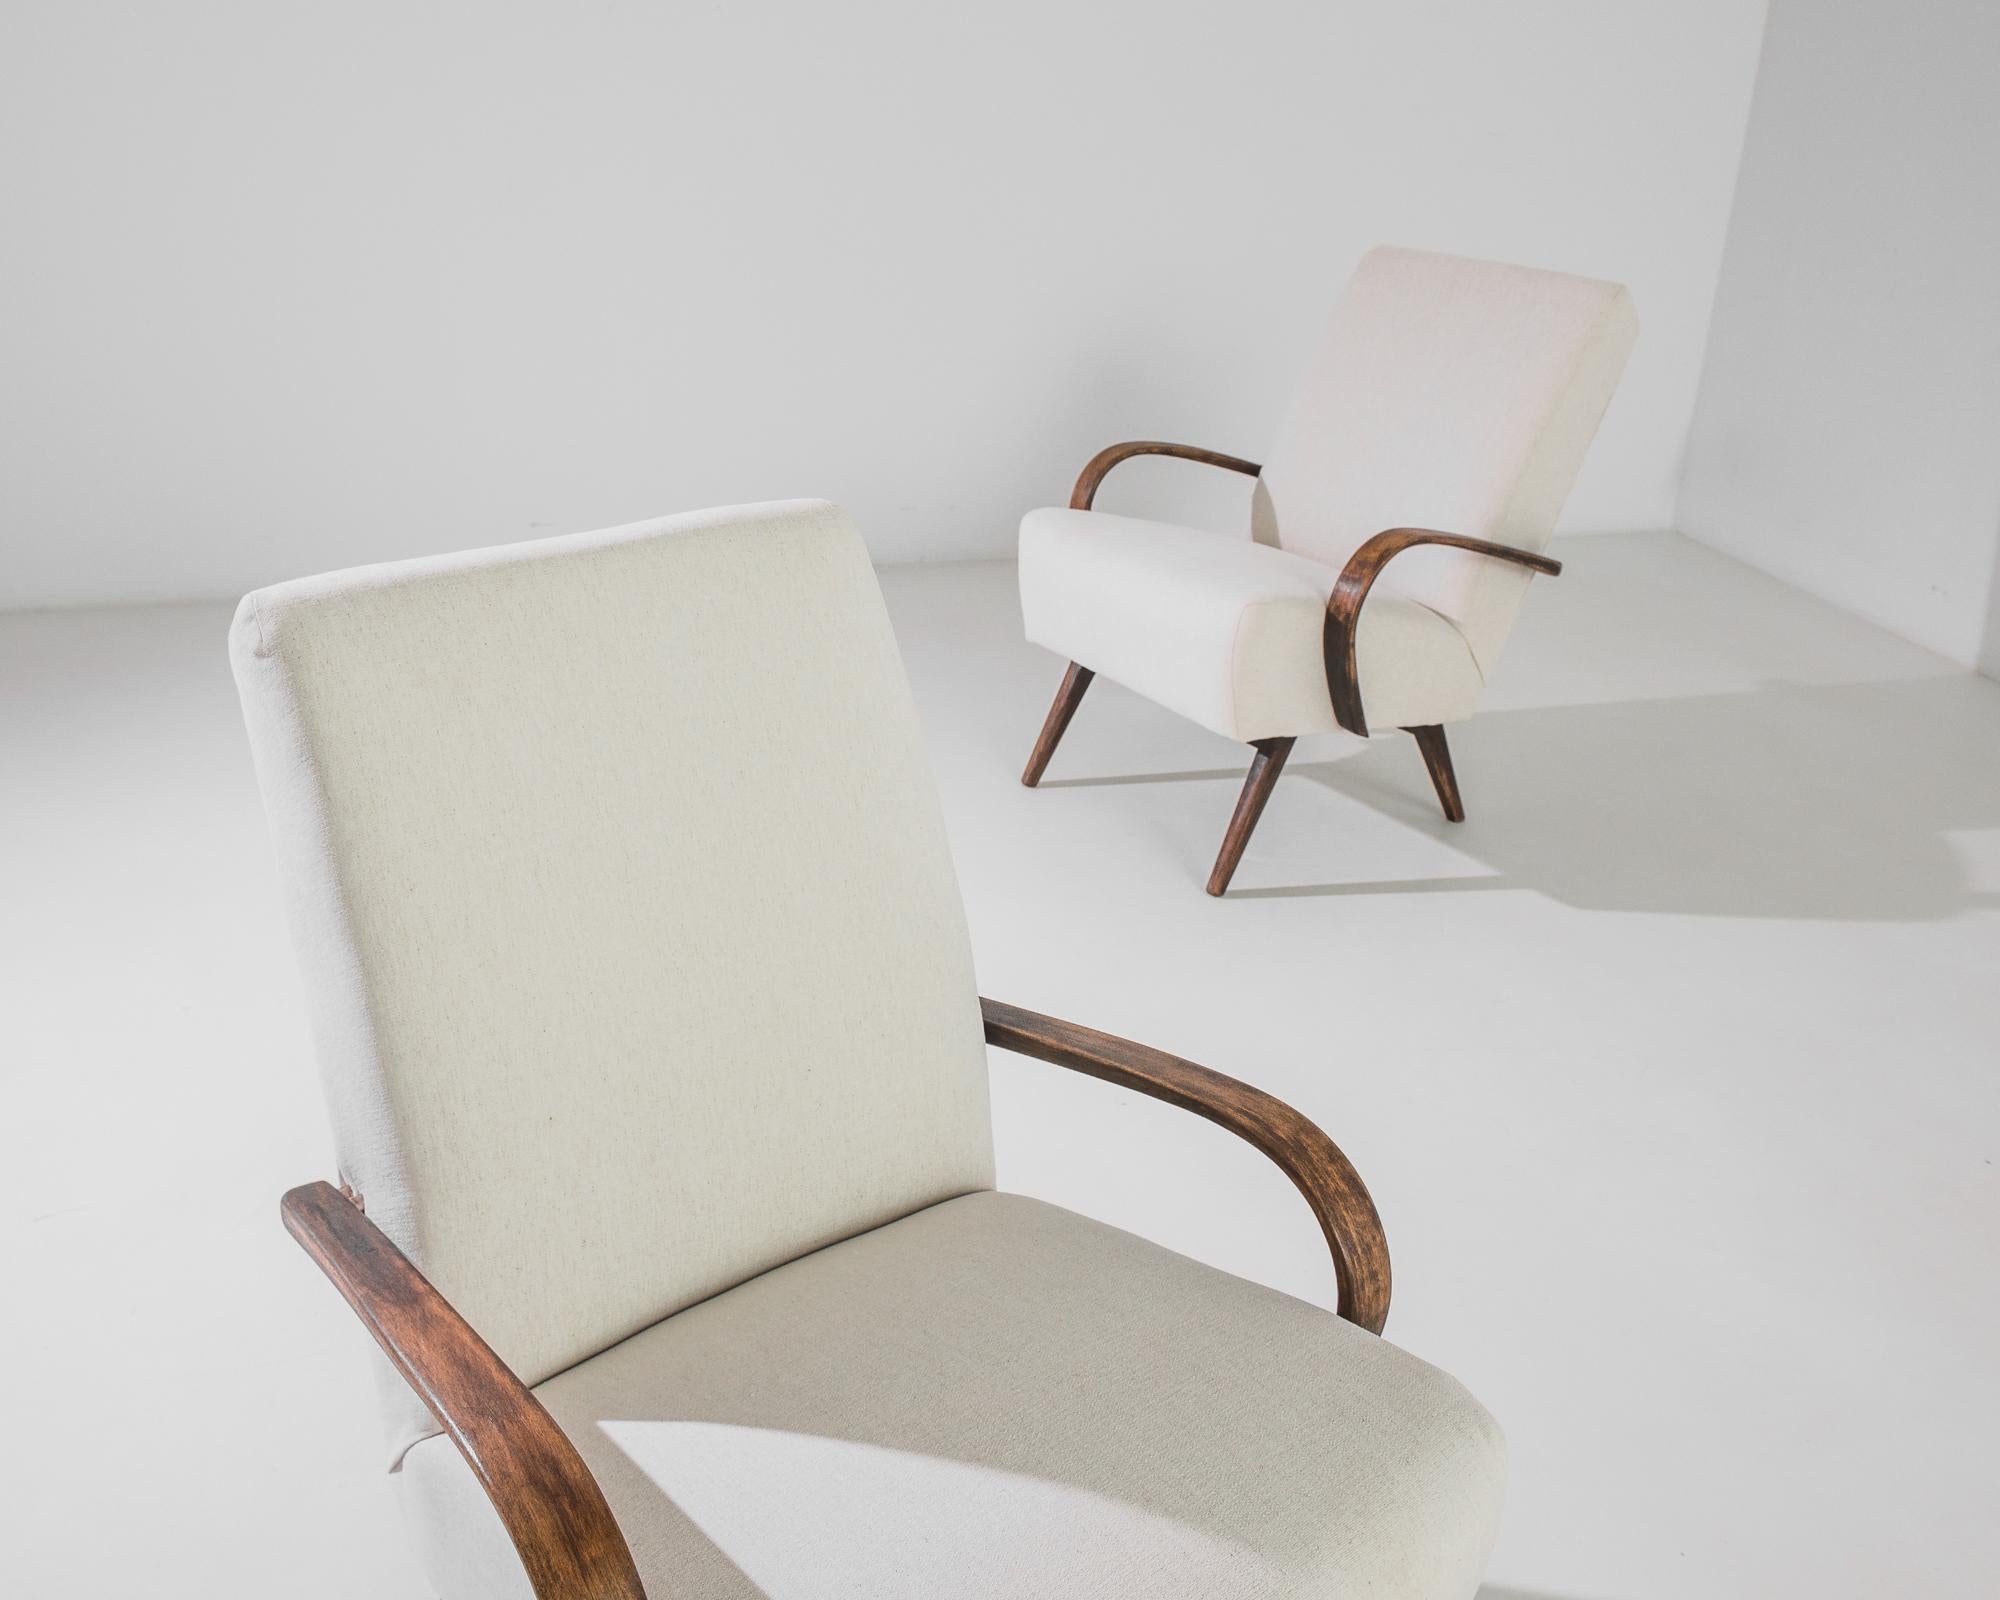 A pair of armchairs by Czech furniture designer Jindrich Halabala. This 1950s design is upholstered in an updated natural white fabric, the soothing earth tone was chosen to compliment the natural finish of the hardwood frame. Influenced by Modern